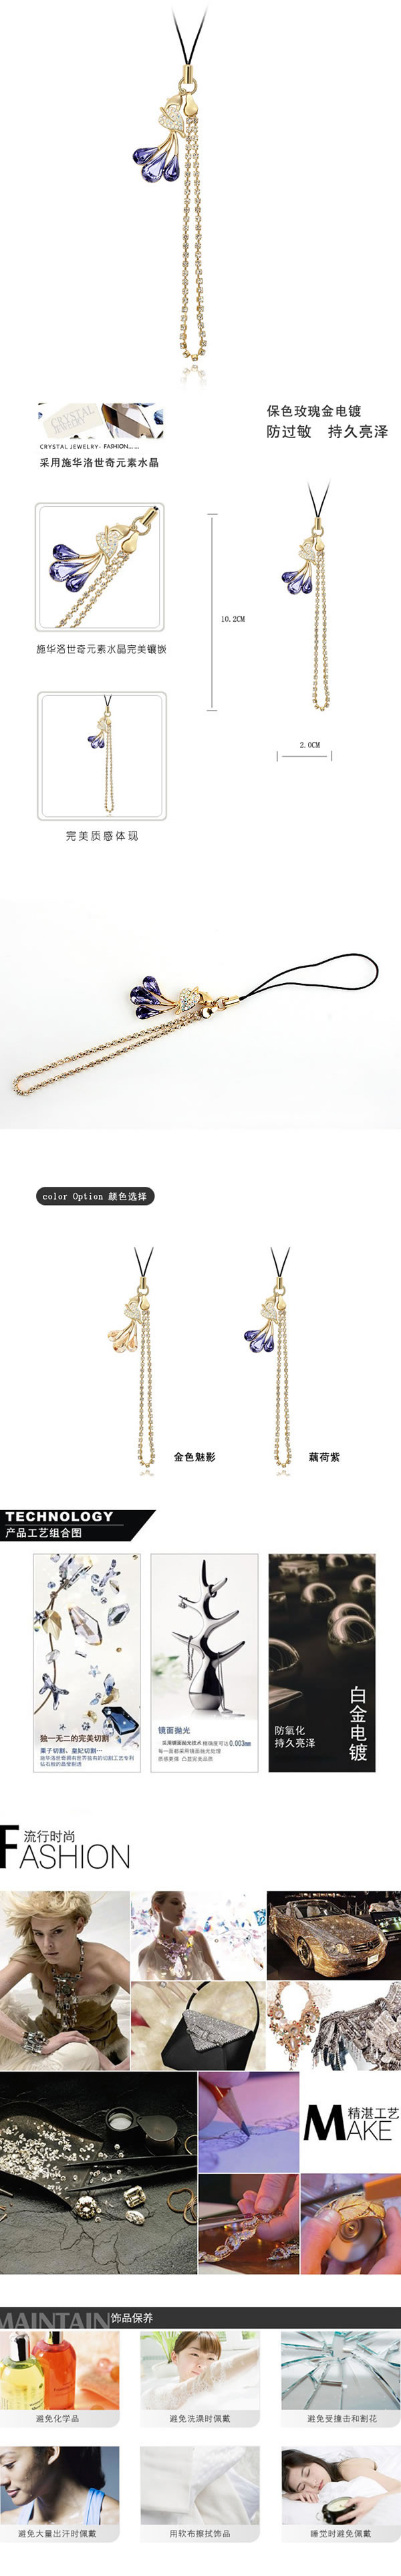 Rugged Purple Bag Chain-Leaves  Design Alloy Mobile phone products,Anti-Dust Plug